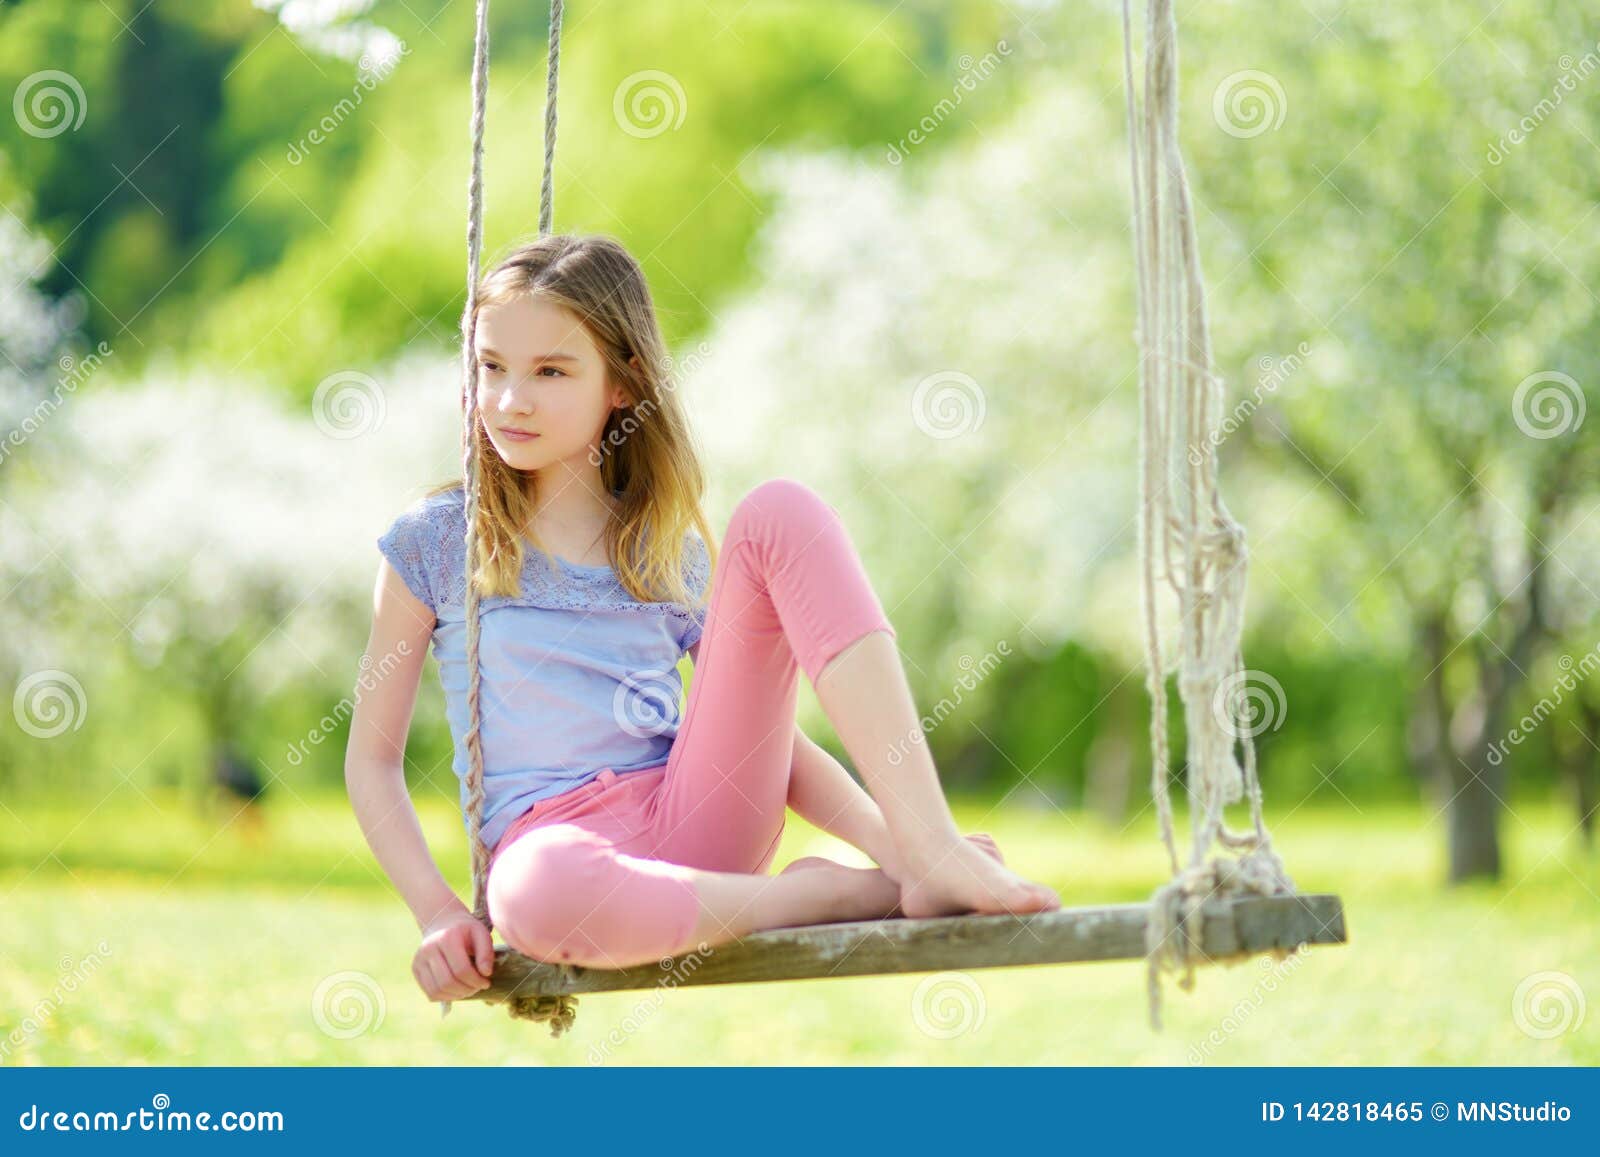 Cute Little Girl Having Fun on a Swing in Blossoming Old Apple Tree ...